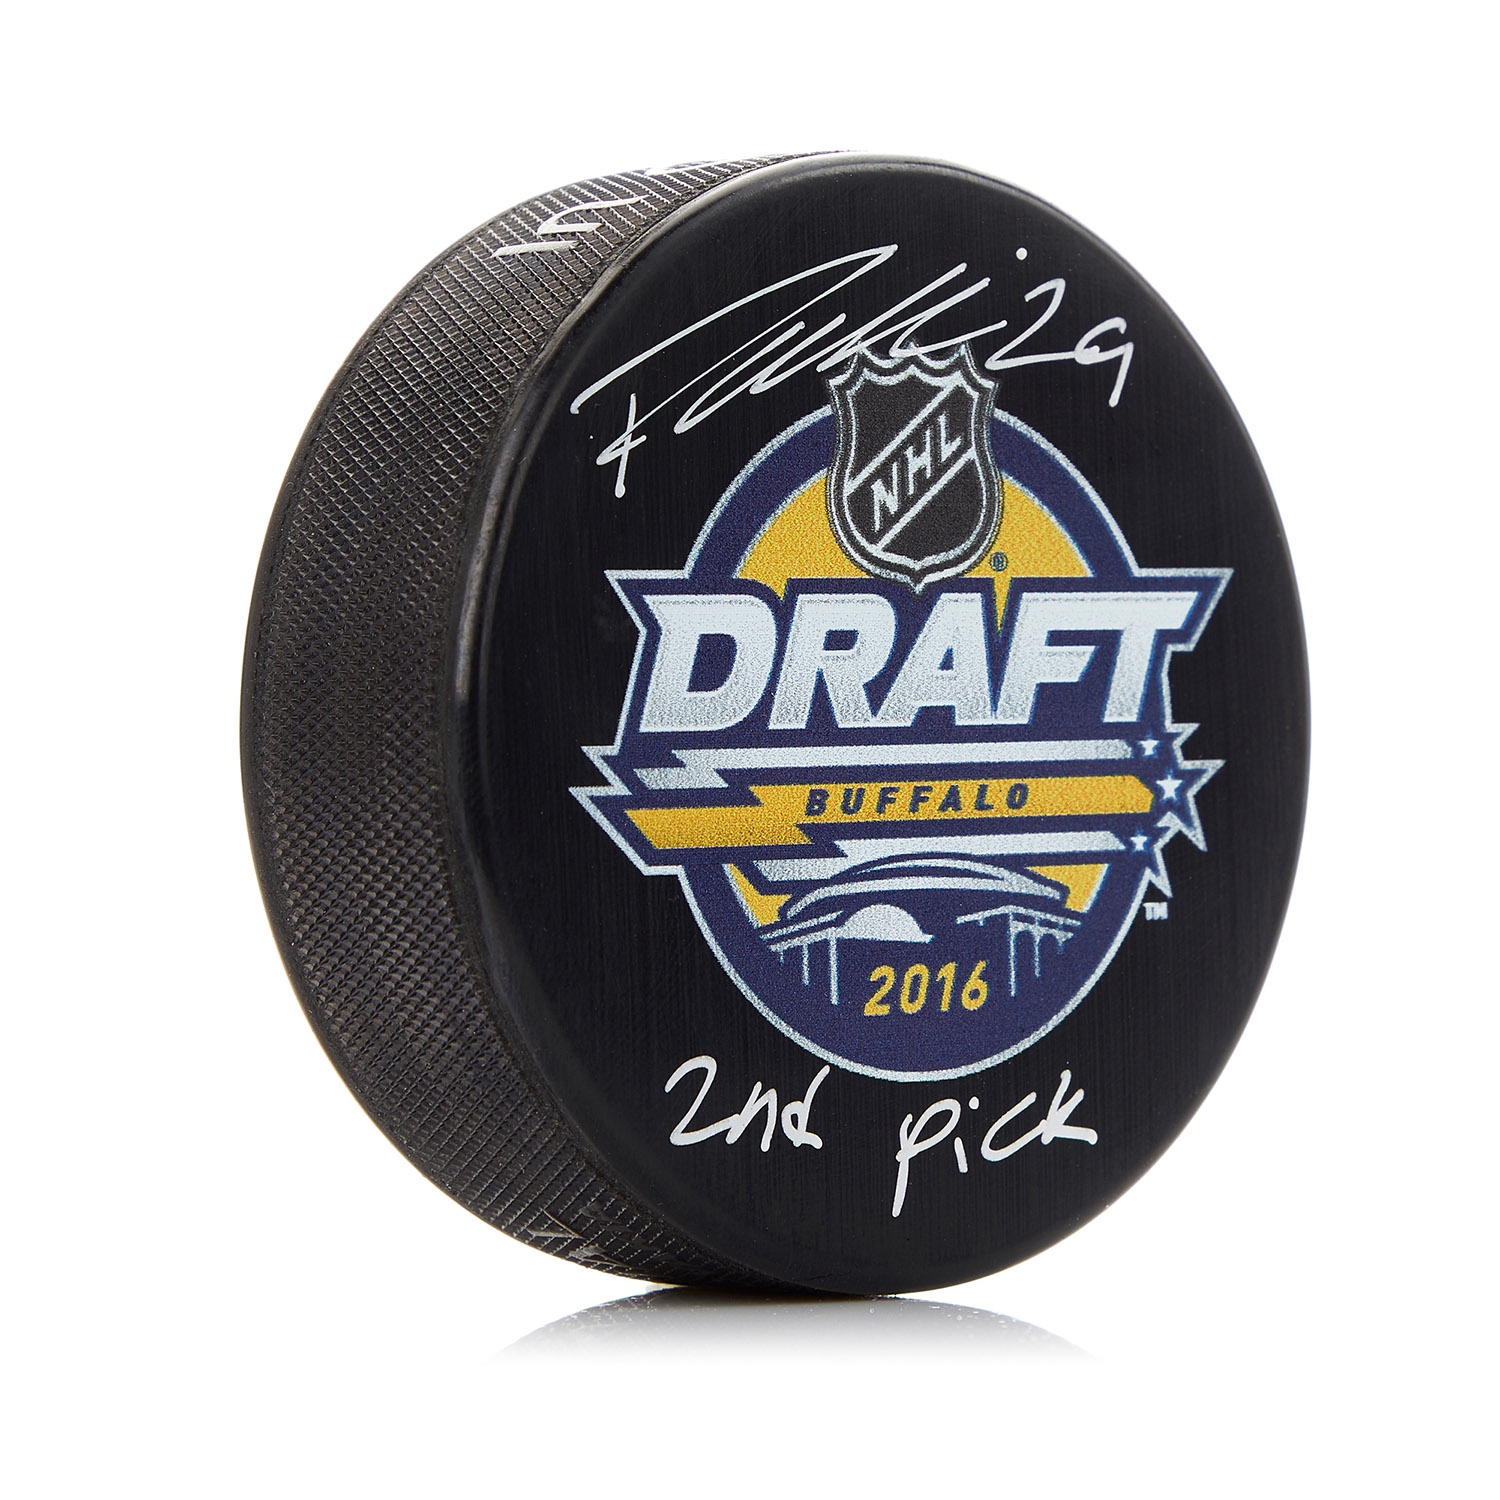 Patrik Laine Signed 2016 NHL Entry Draft Puck with 2nd Pick Note